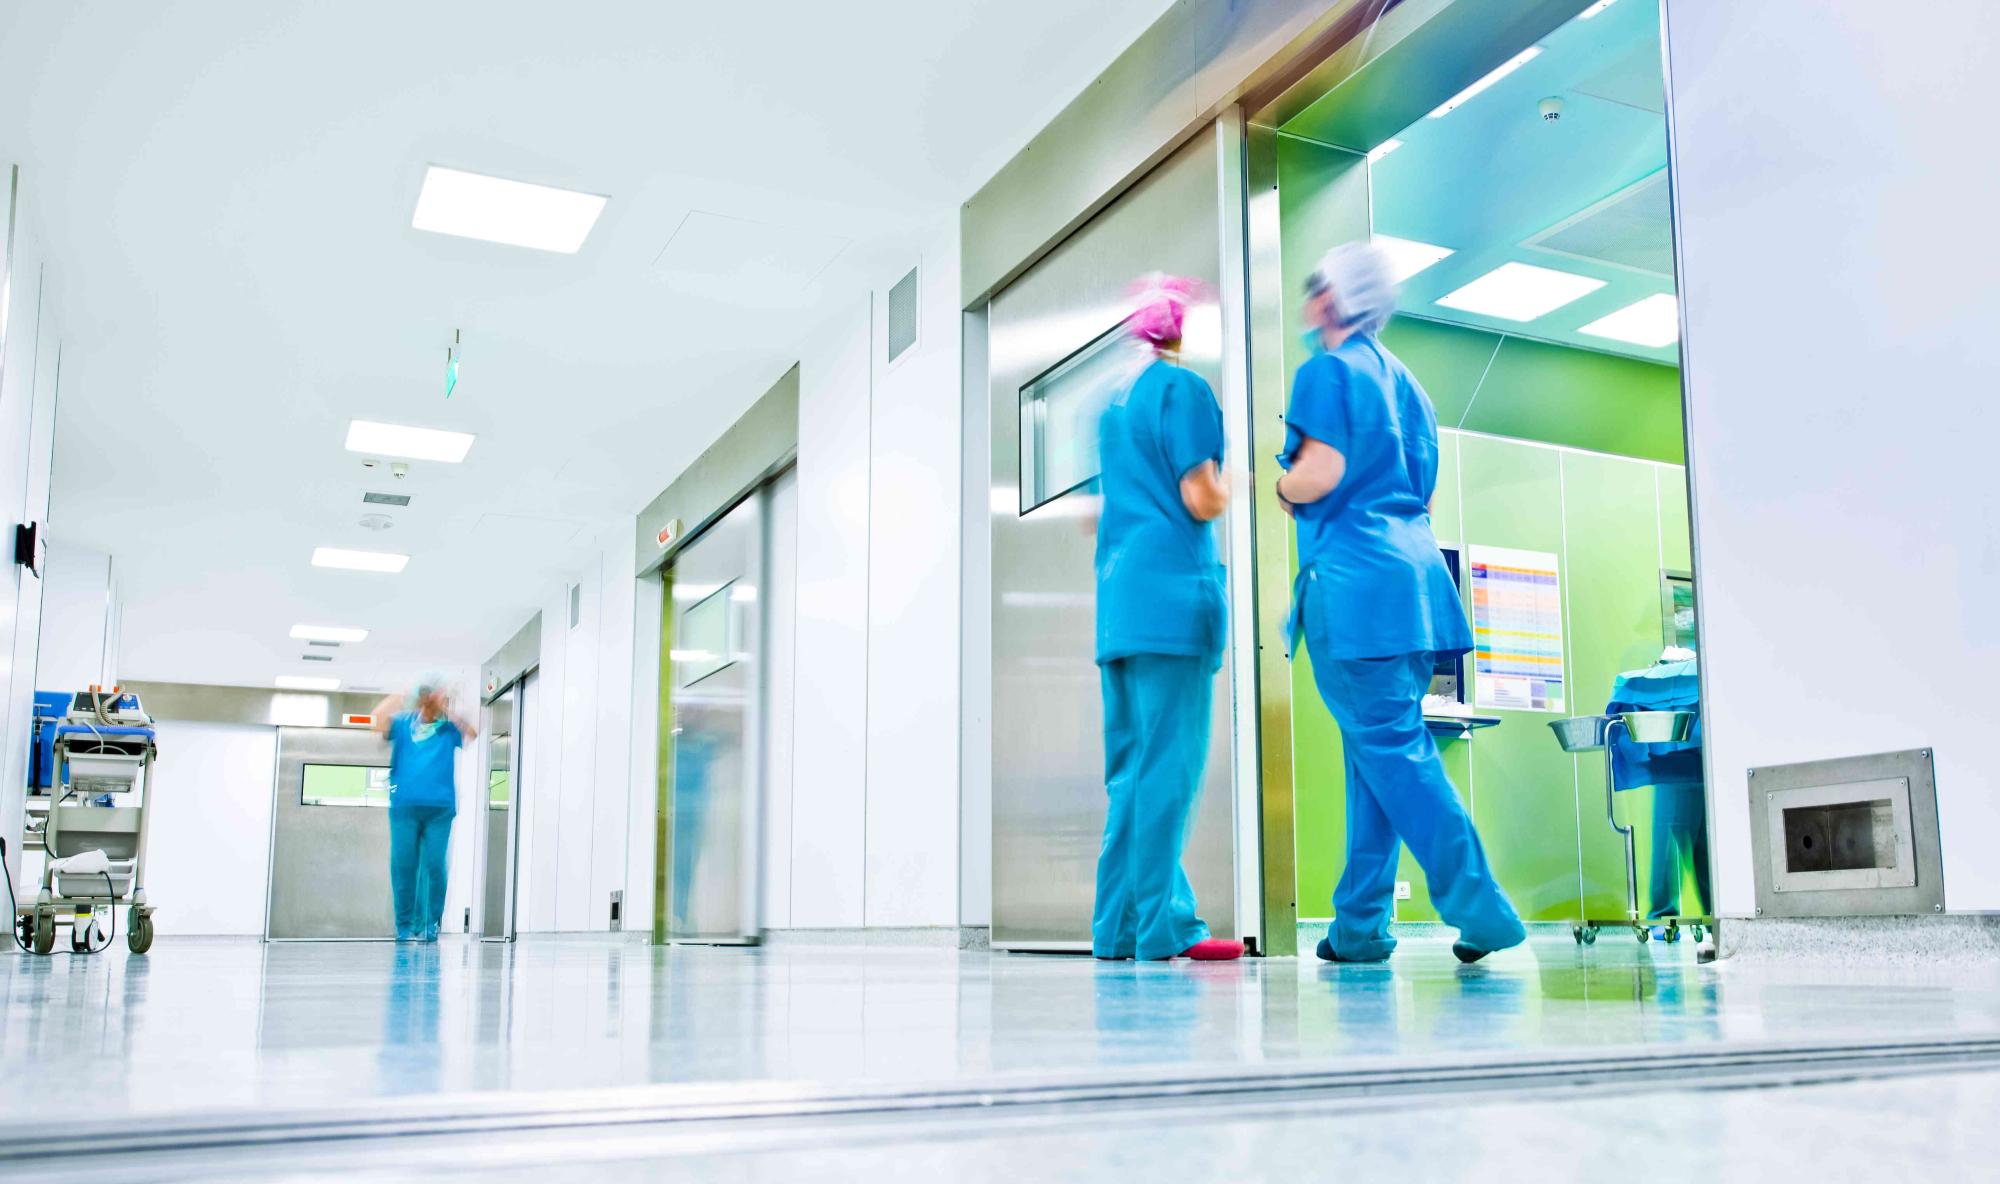 blurred figures wearing medical uniforms in hospital surgery cor